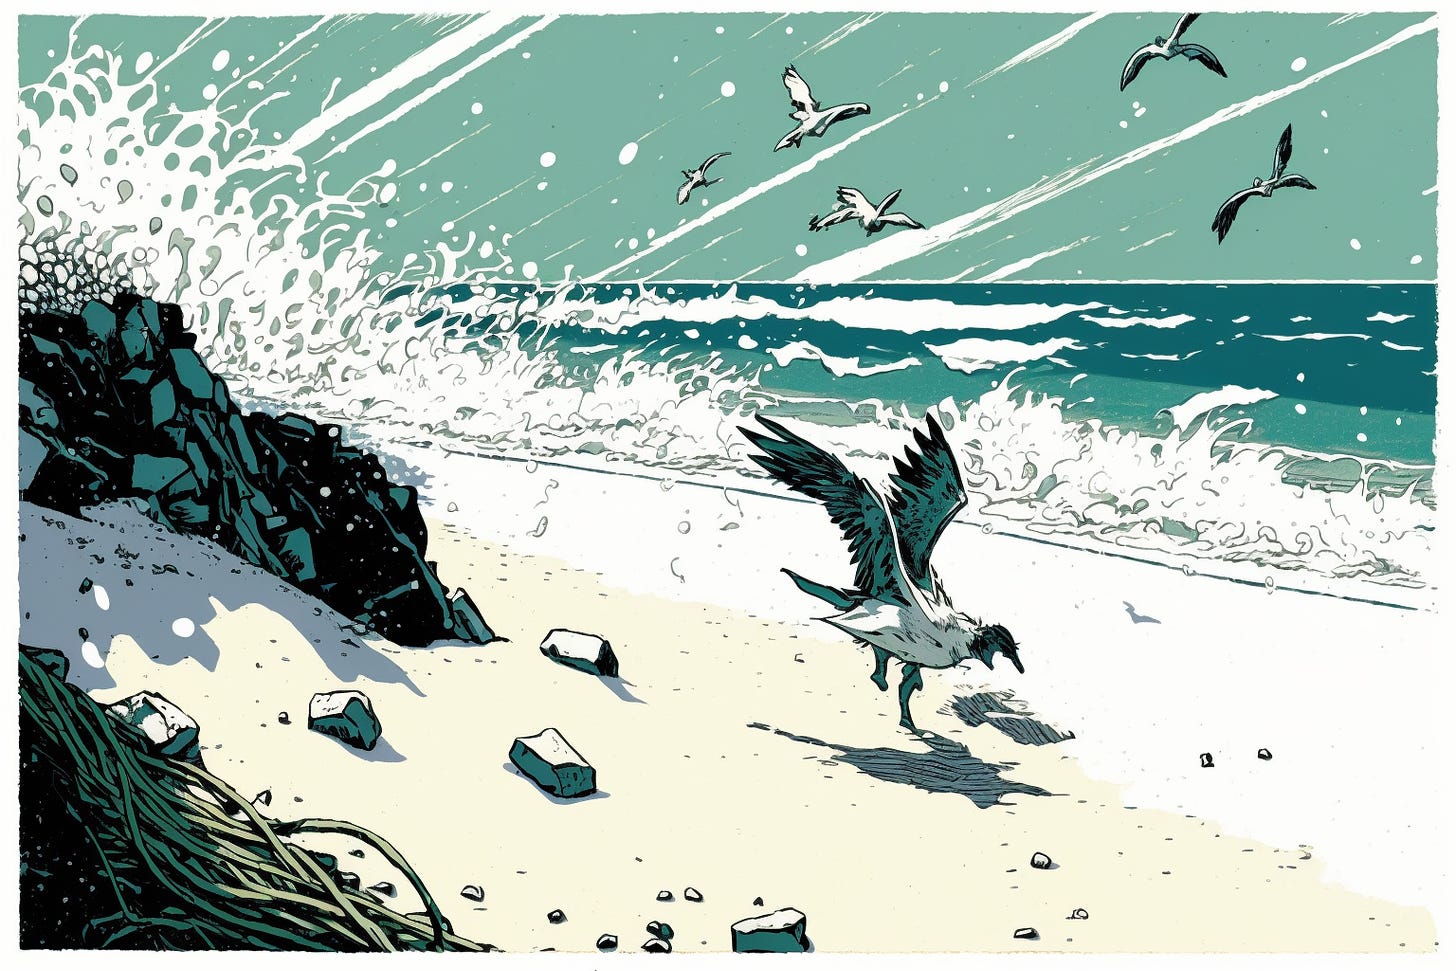 A seagull on the side of shore with giant waves crashing in the background, graphic novel